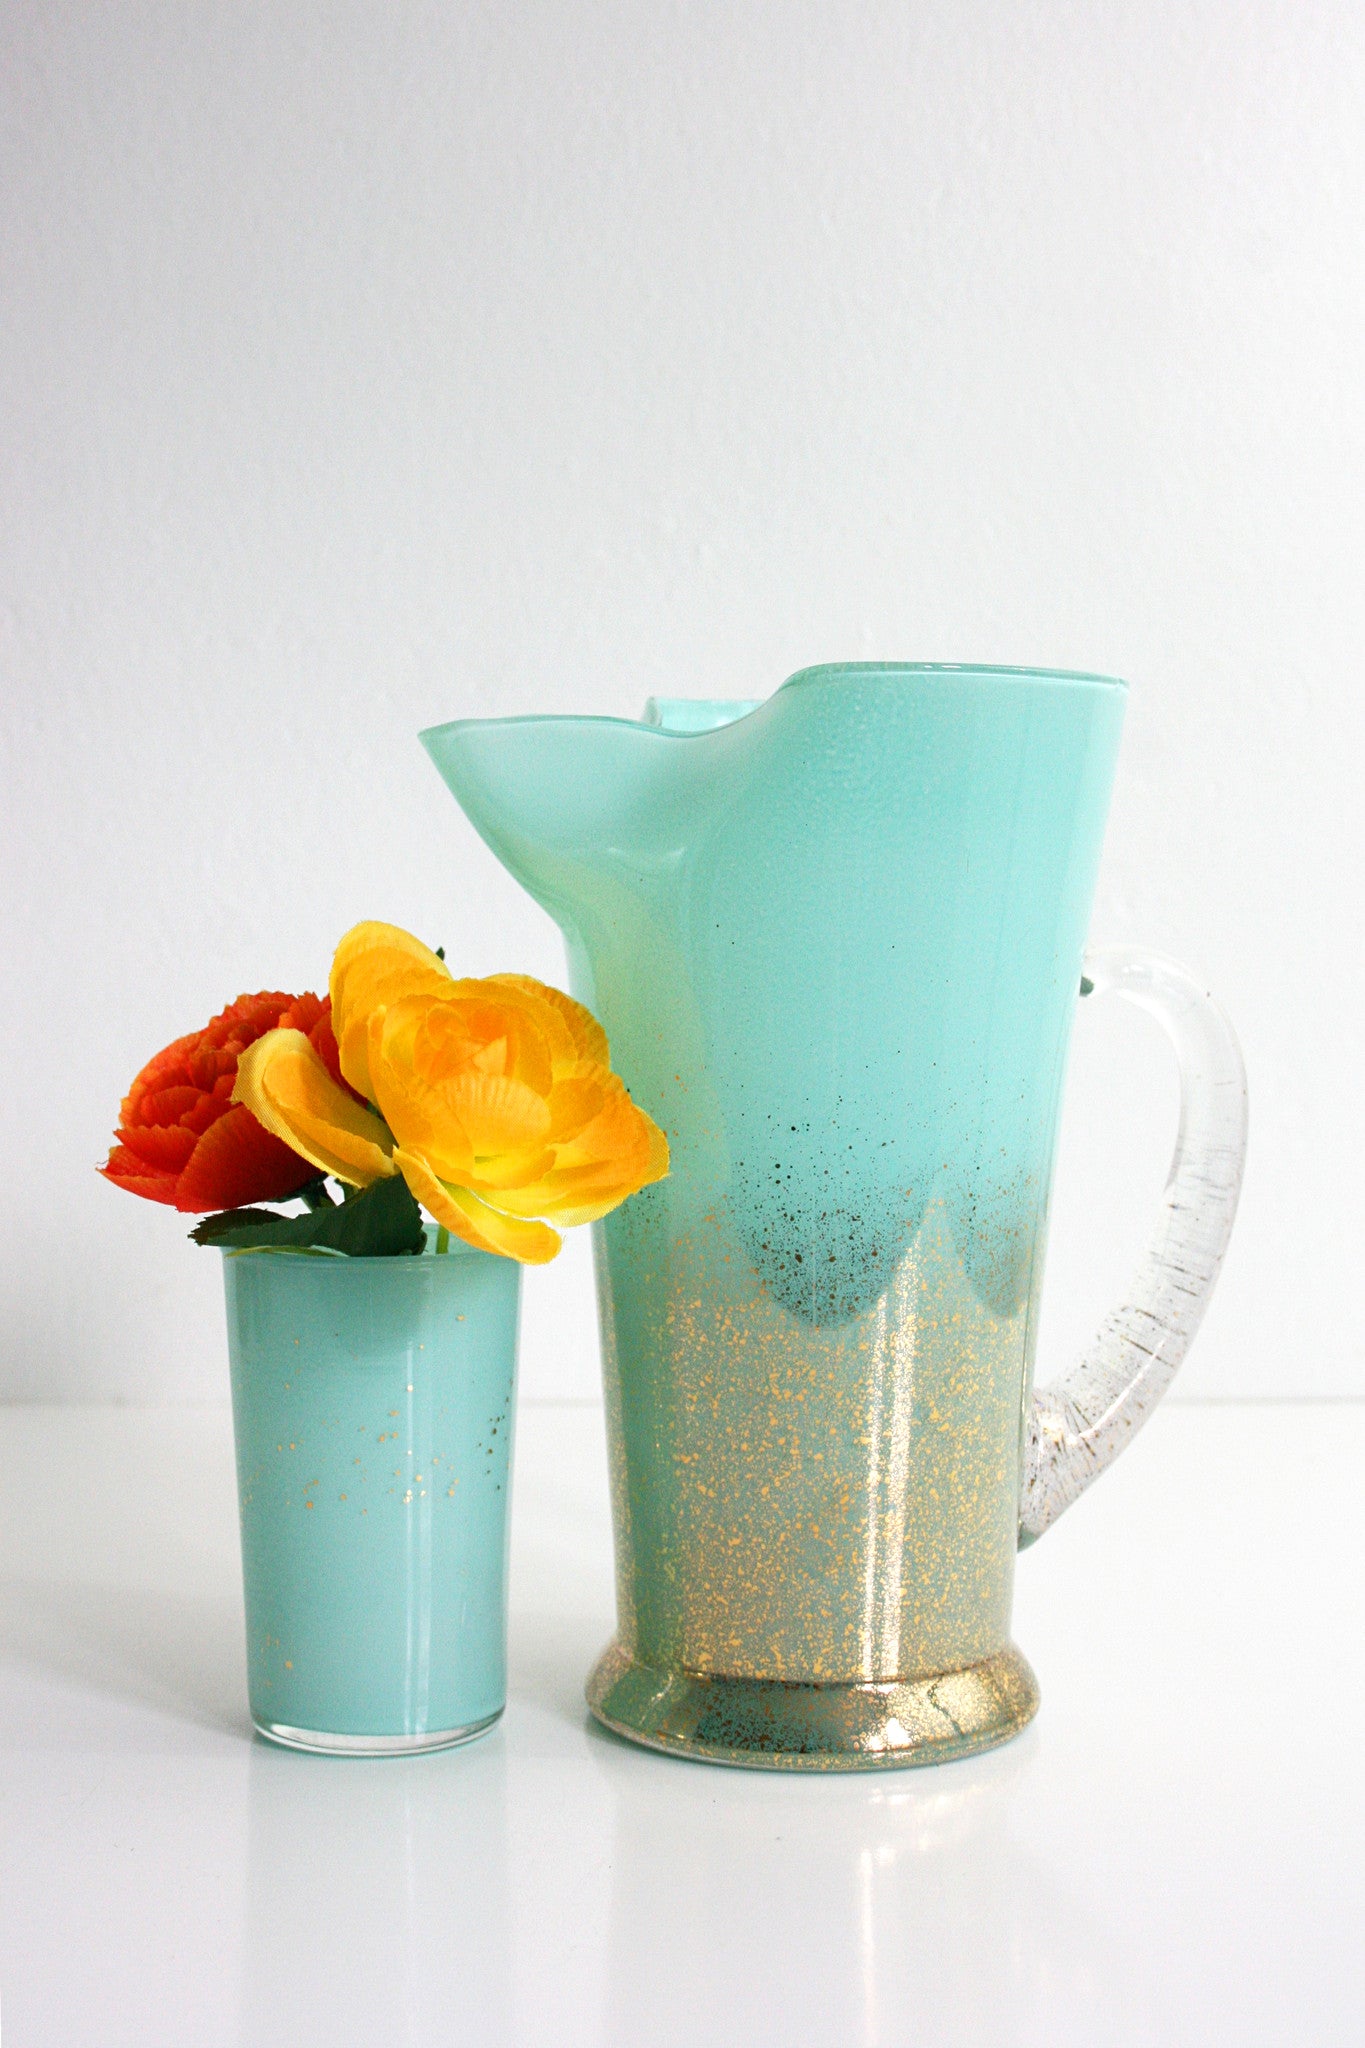 SOLD - Mid Century Modern Aqua and Gold Maritni Pitcher / Vintage Cocktail Pitcher and Glass